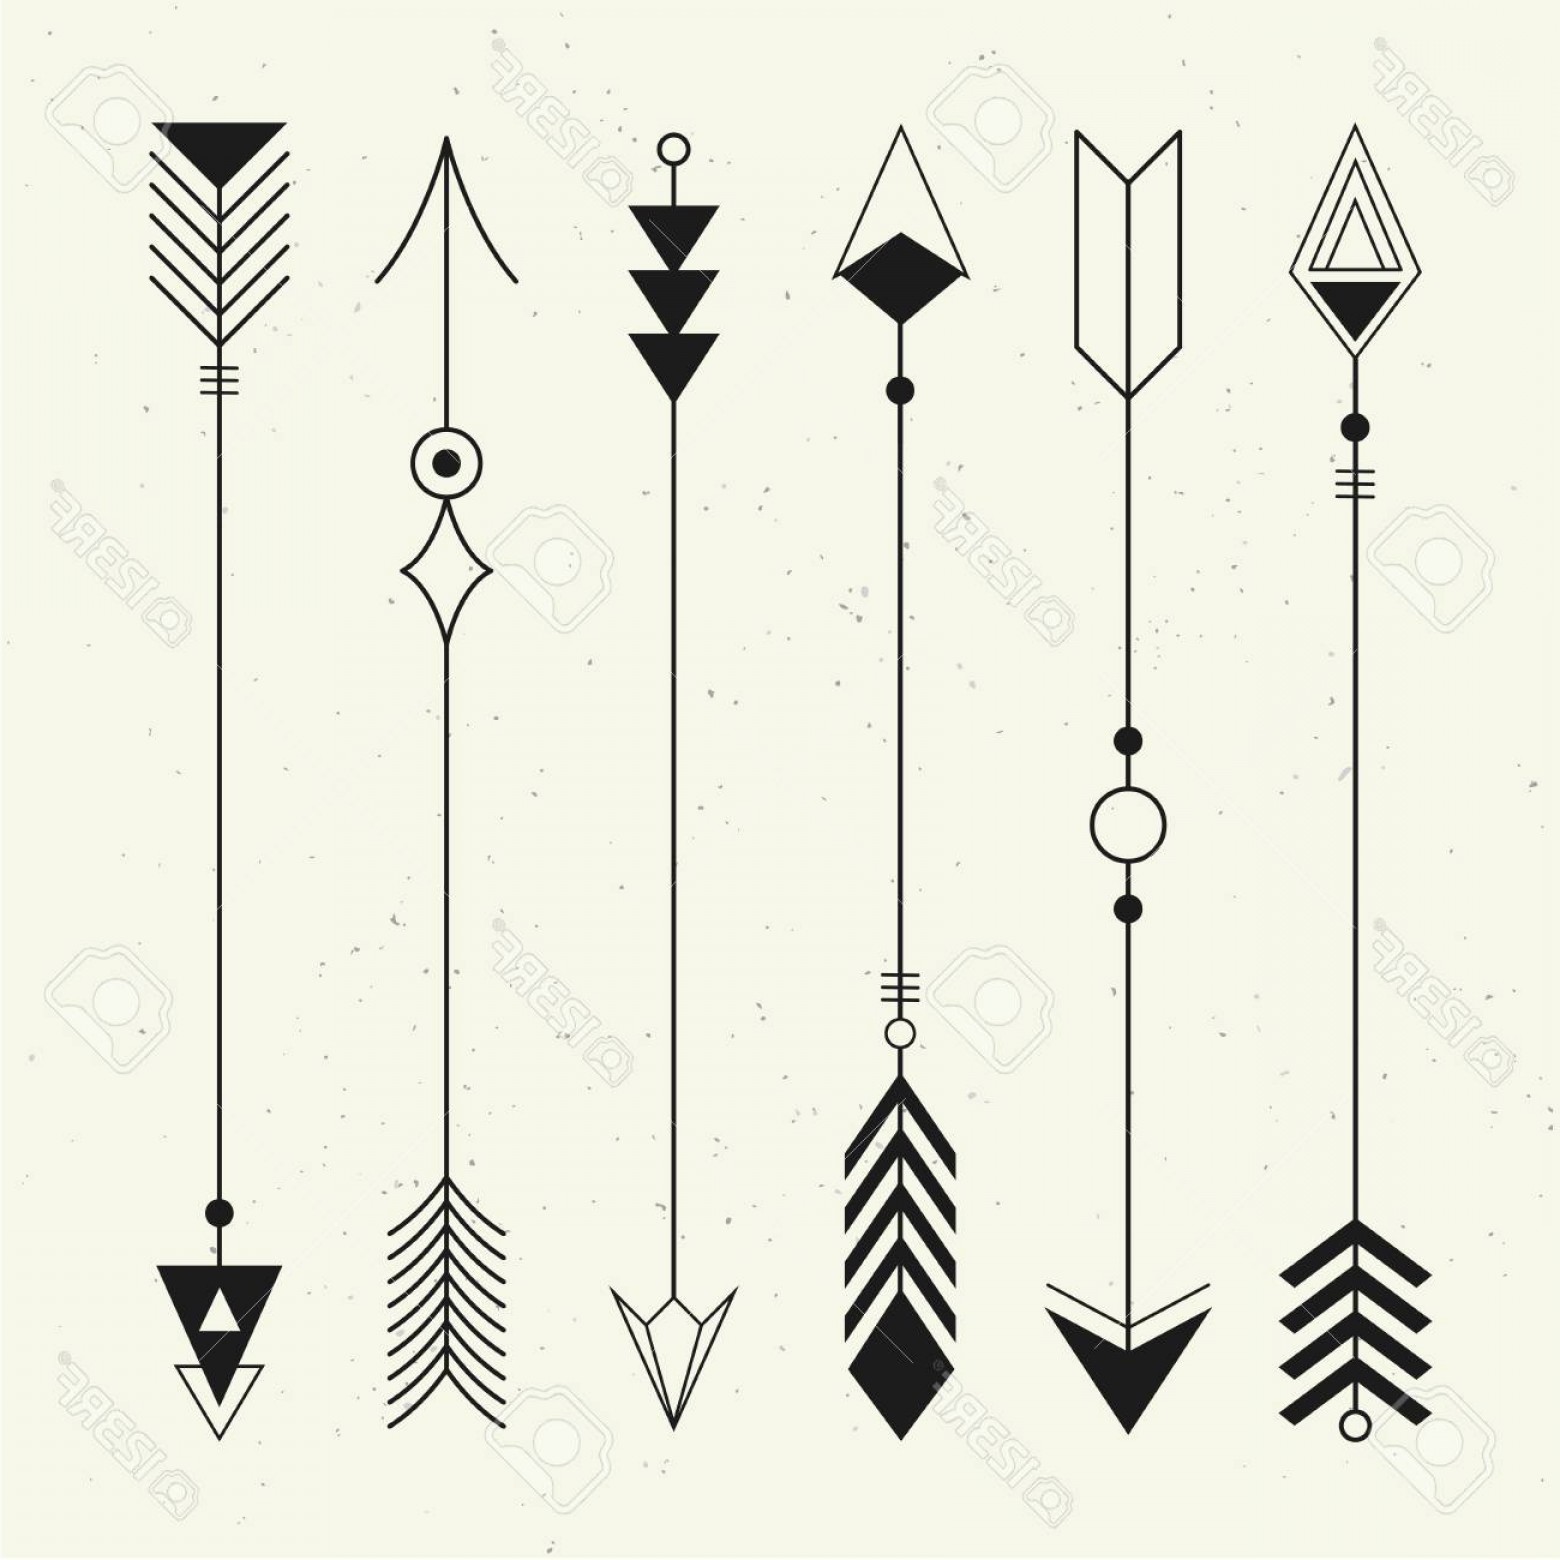 Download Arrow Border Vector at Vectorified.com | Collection of ...